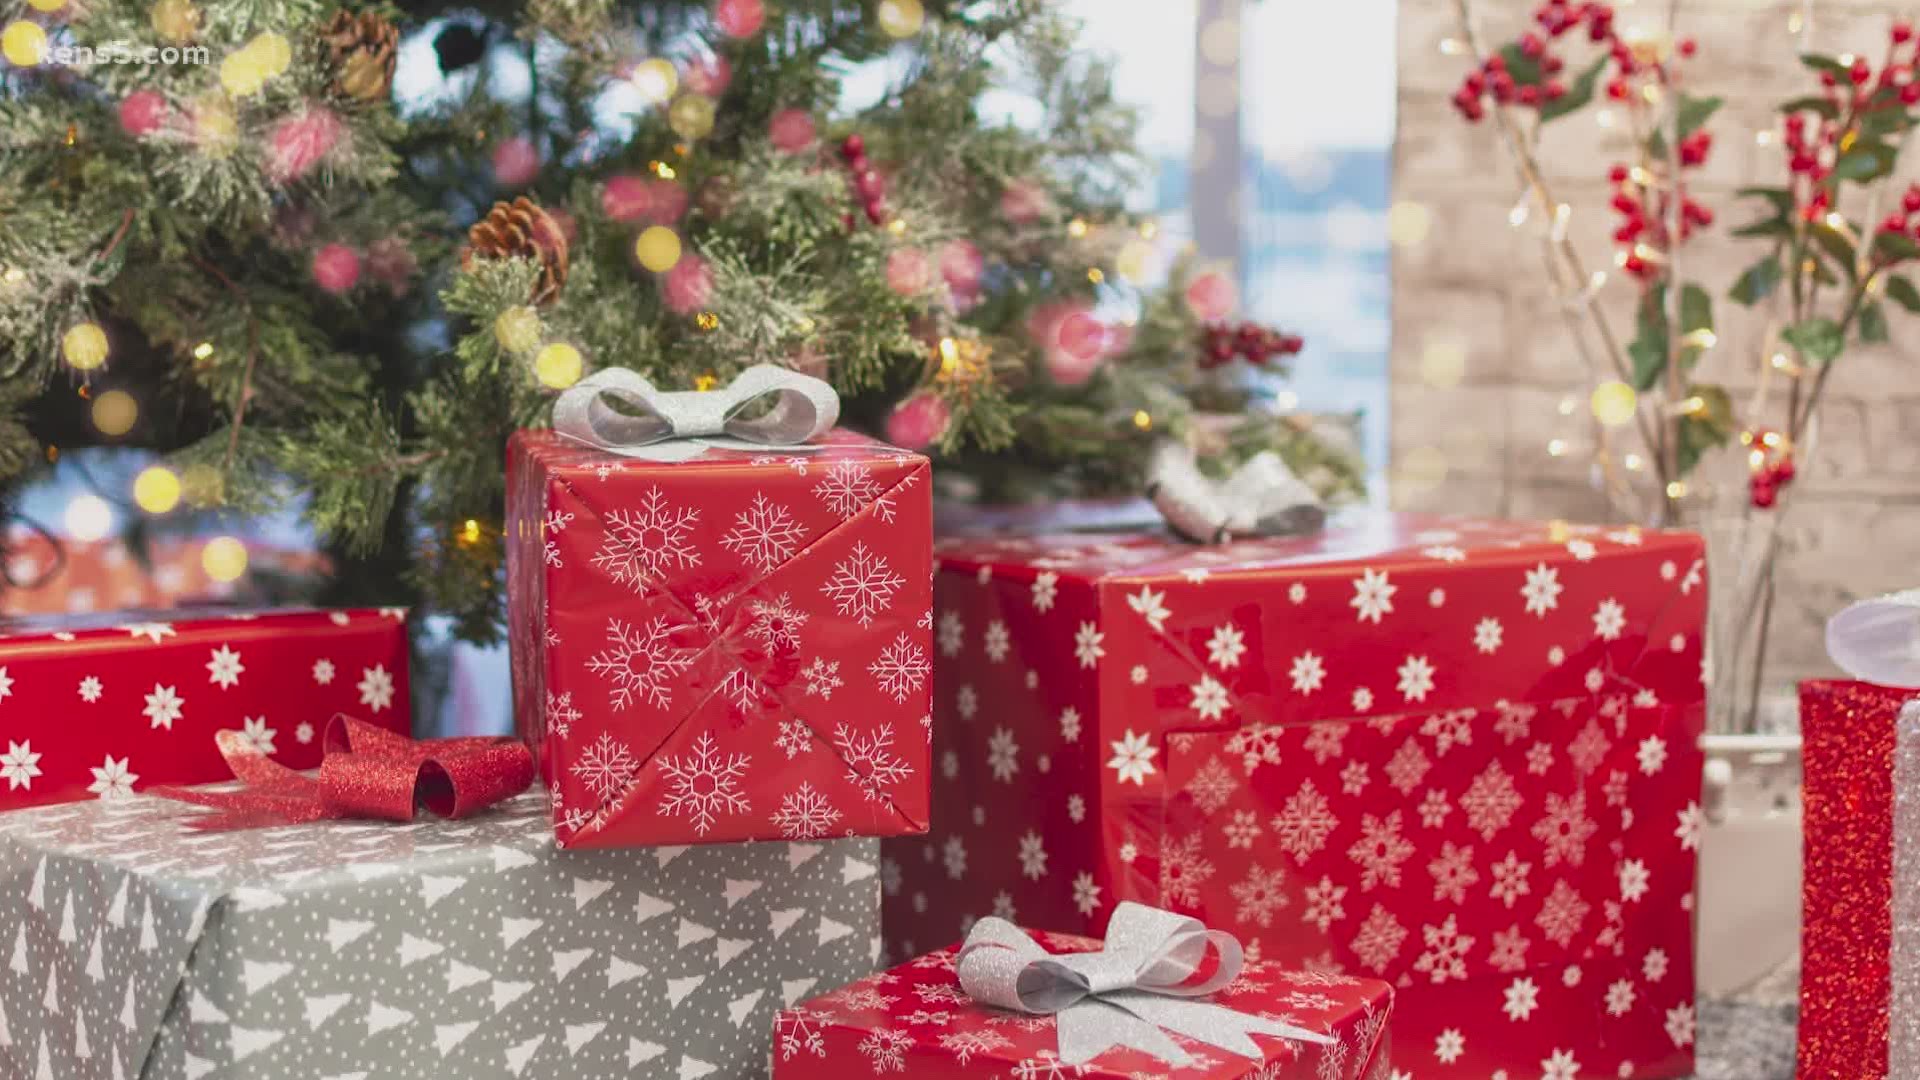 Struggling to decide what to give your family and friends for Christmas this year? Digital Journalist Megan Ball shares the most popular gifts of the season.